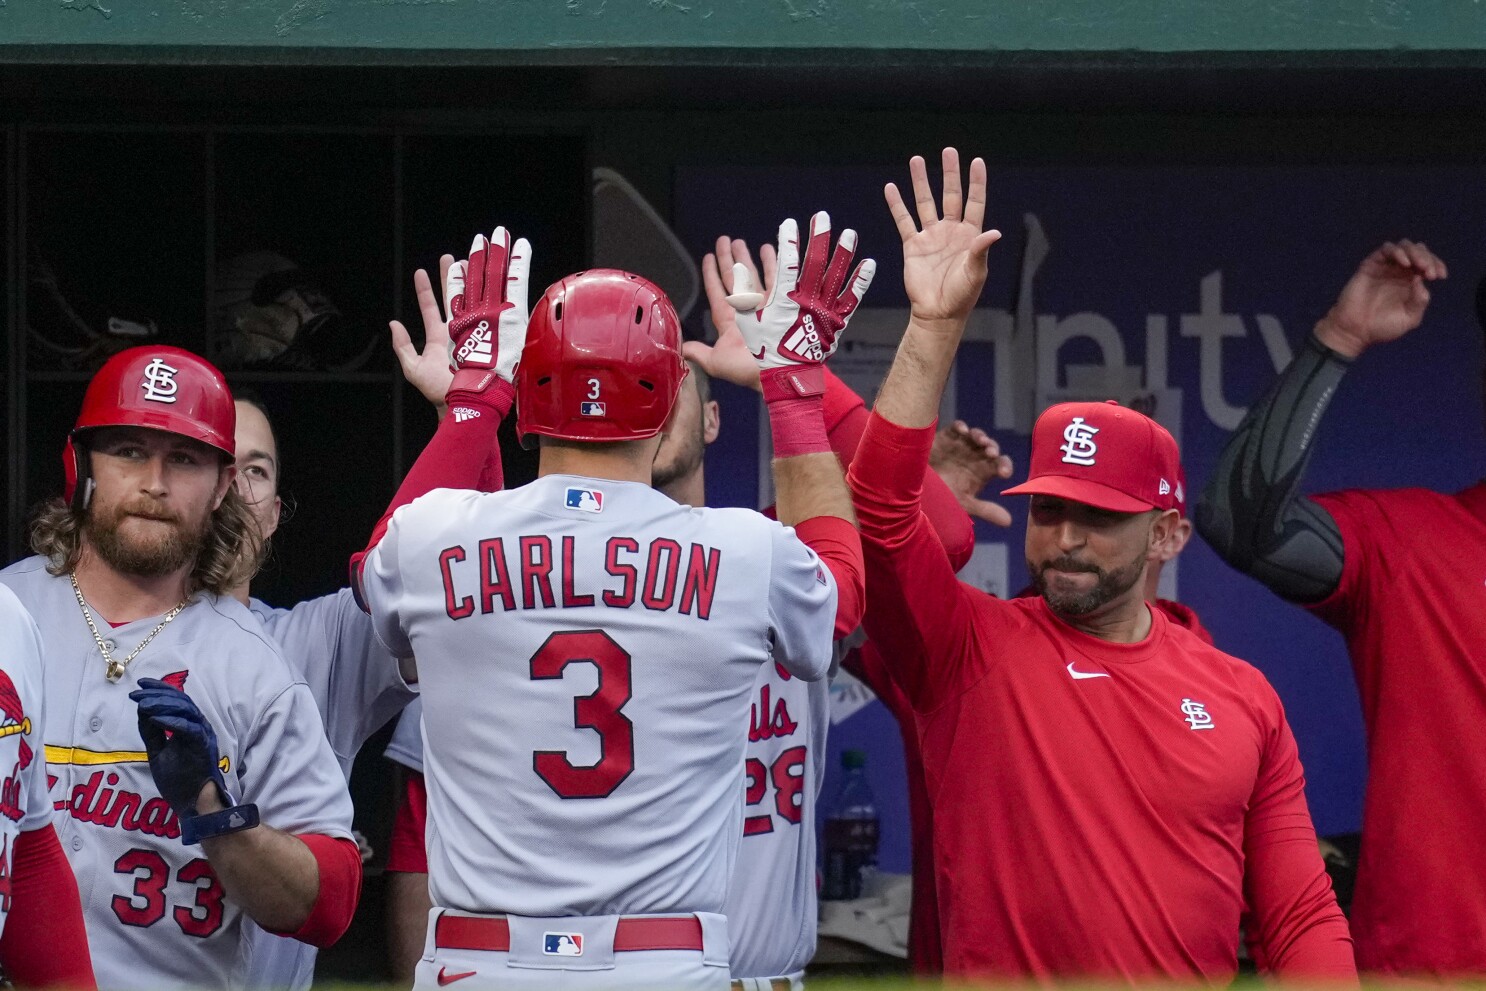 Cardinals score nine runs in fifth inning in win over Nationals